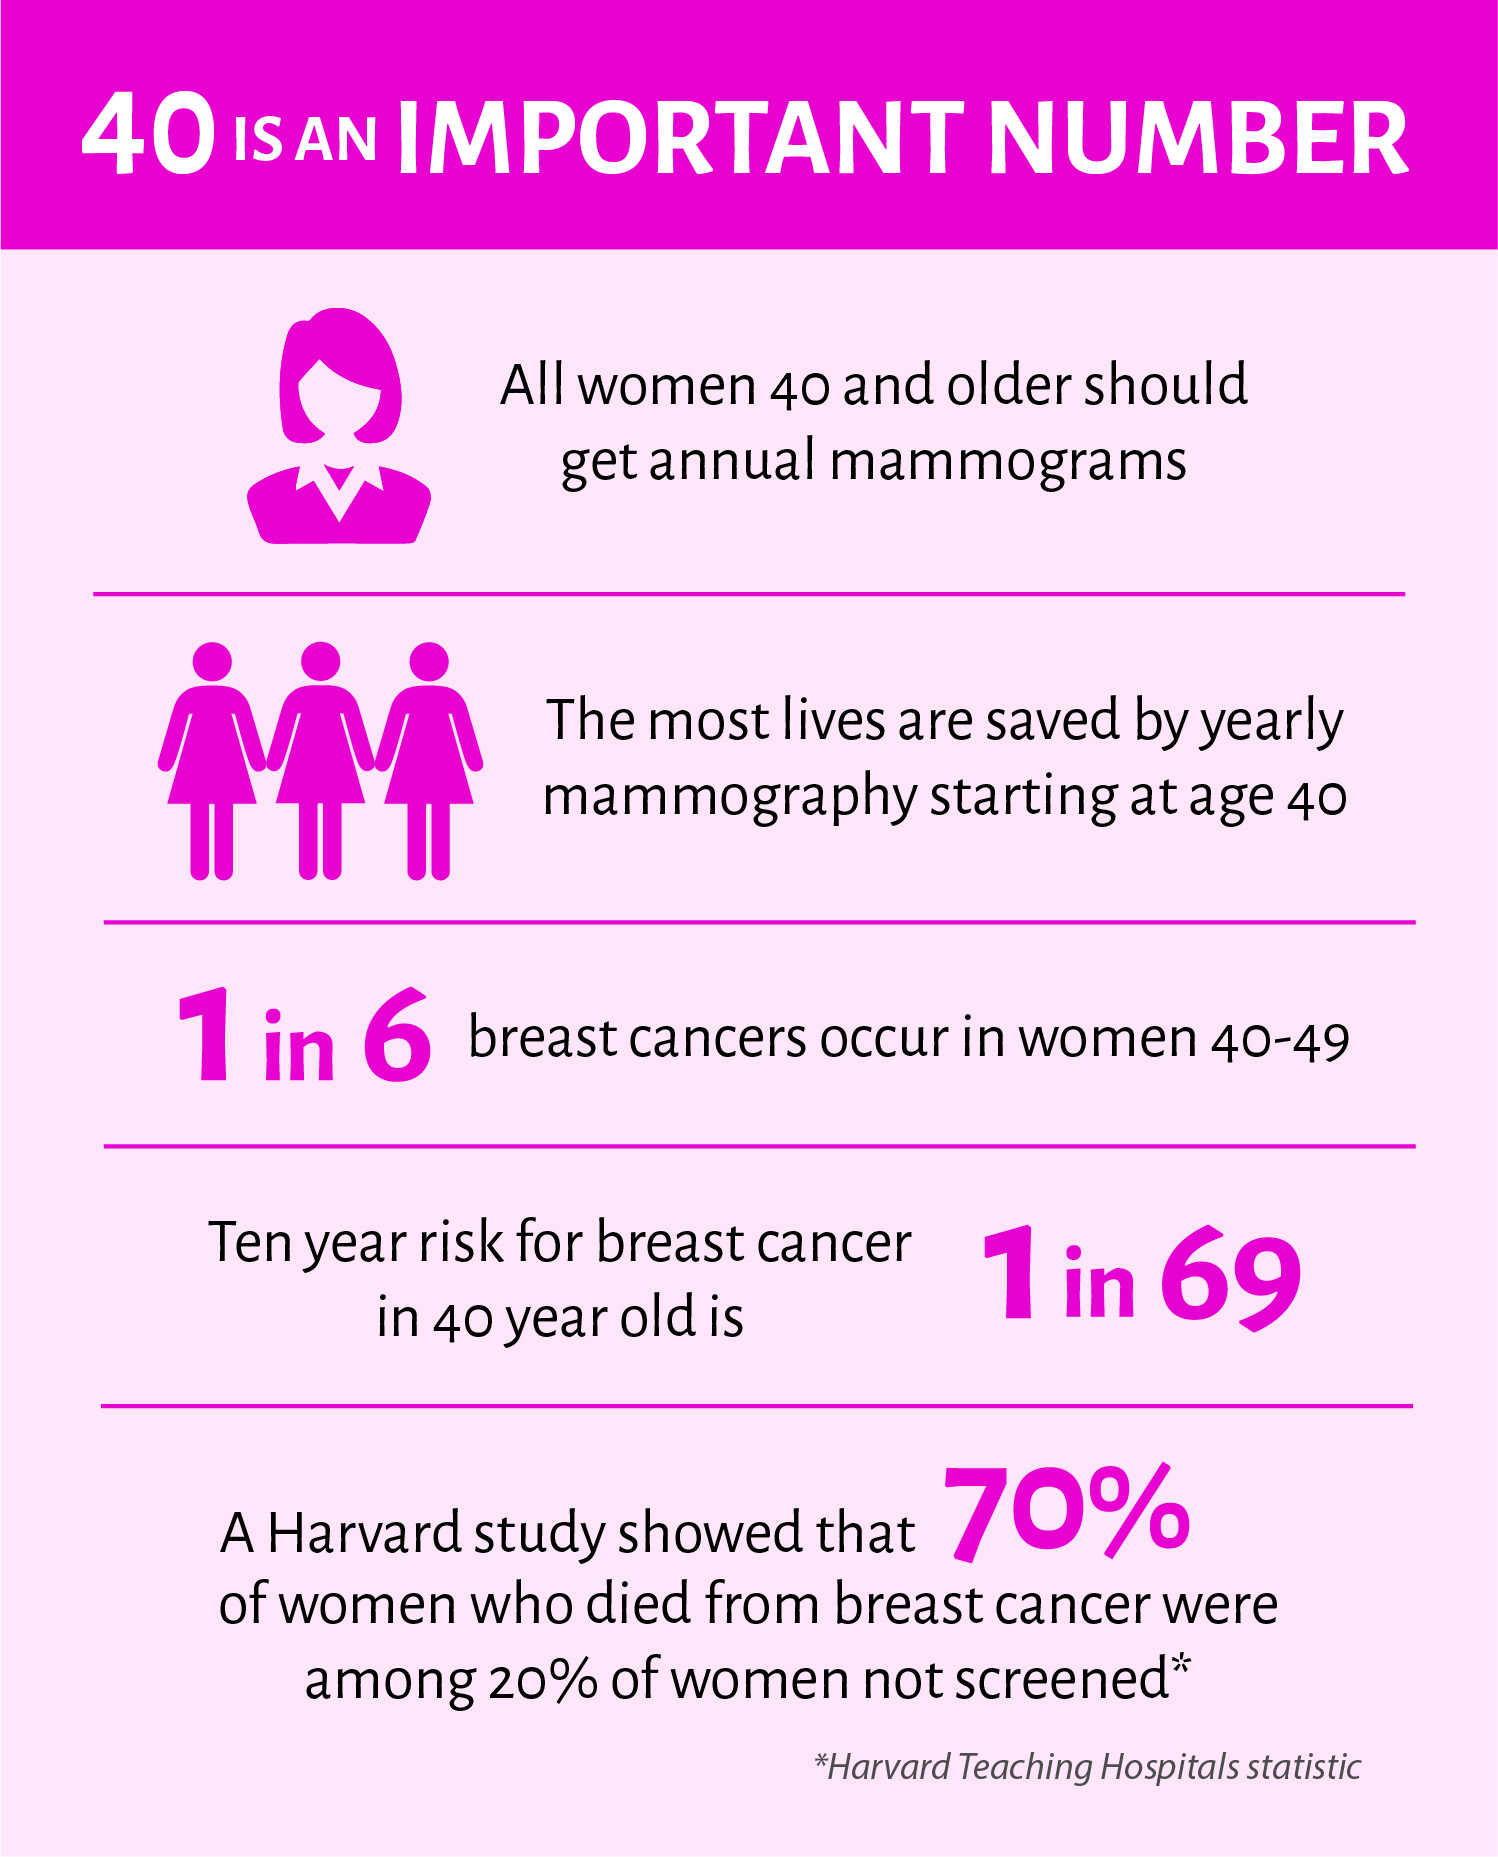 How Common is Breast Cancer for Women in their Forties?